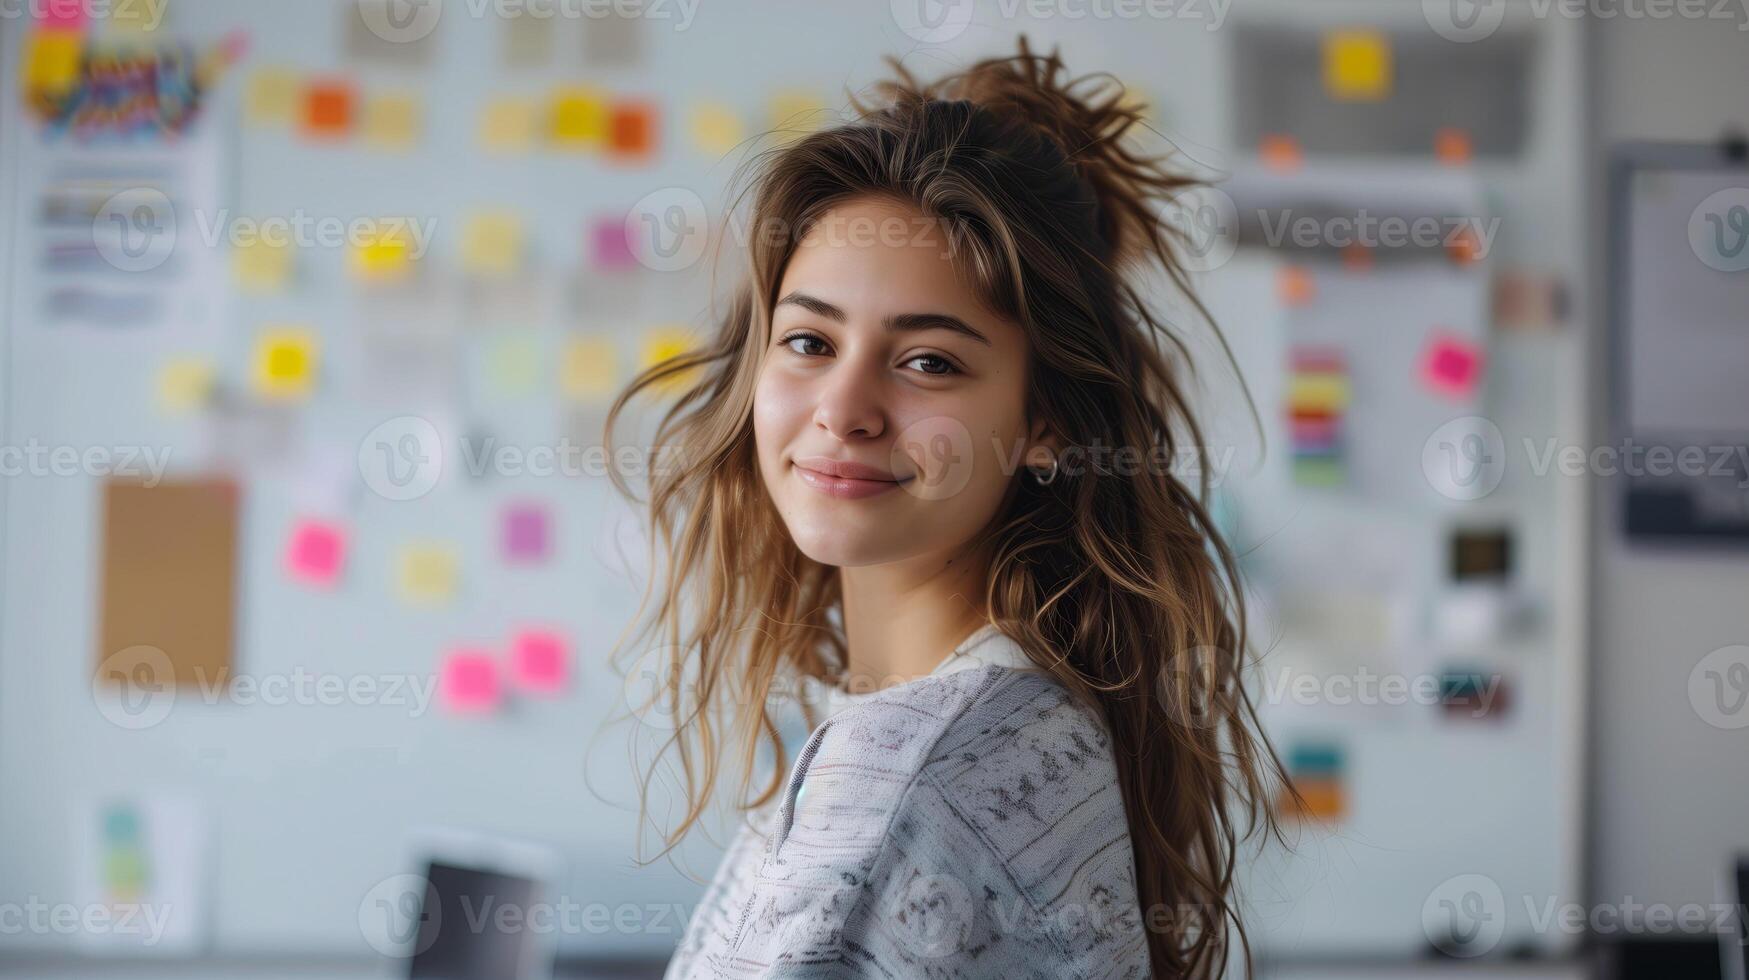 AI generated portrait of woman in front of wall with sticky notes, adhesive notes on wall photo